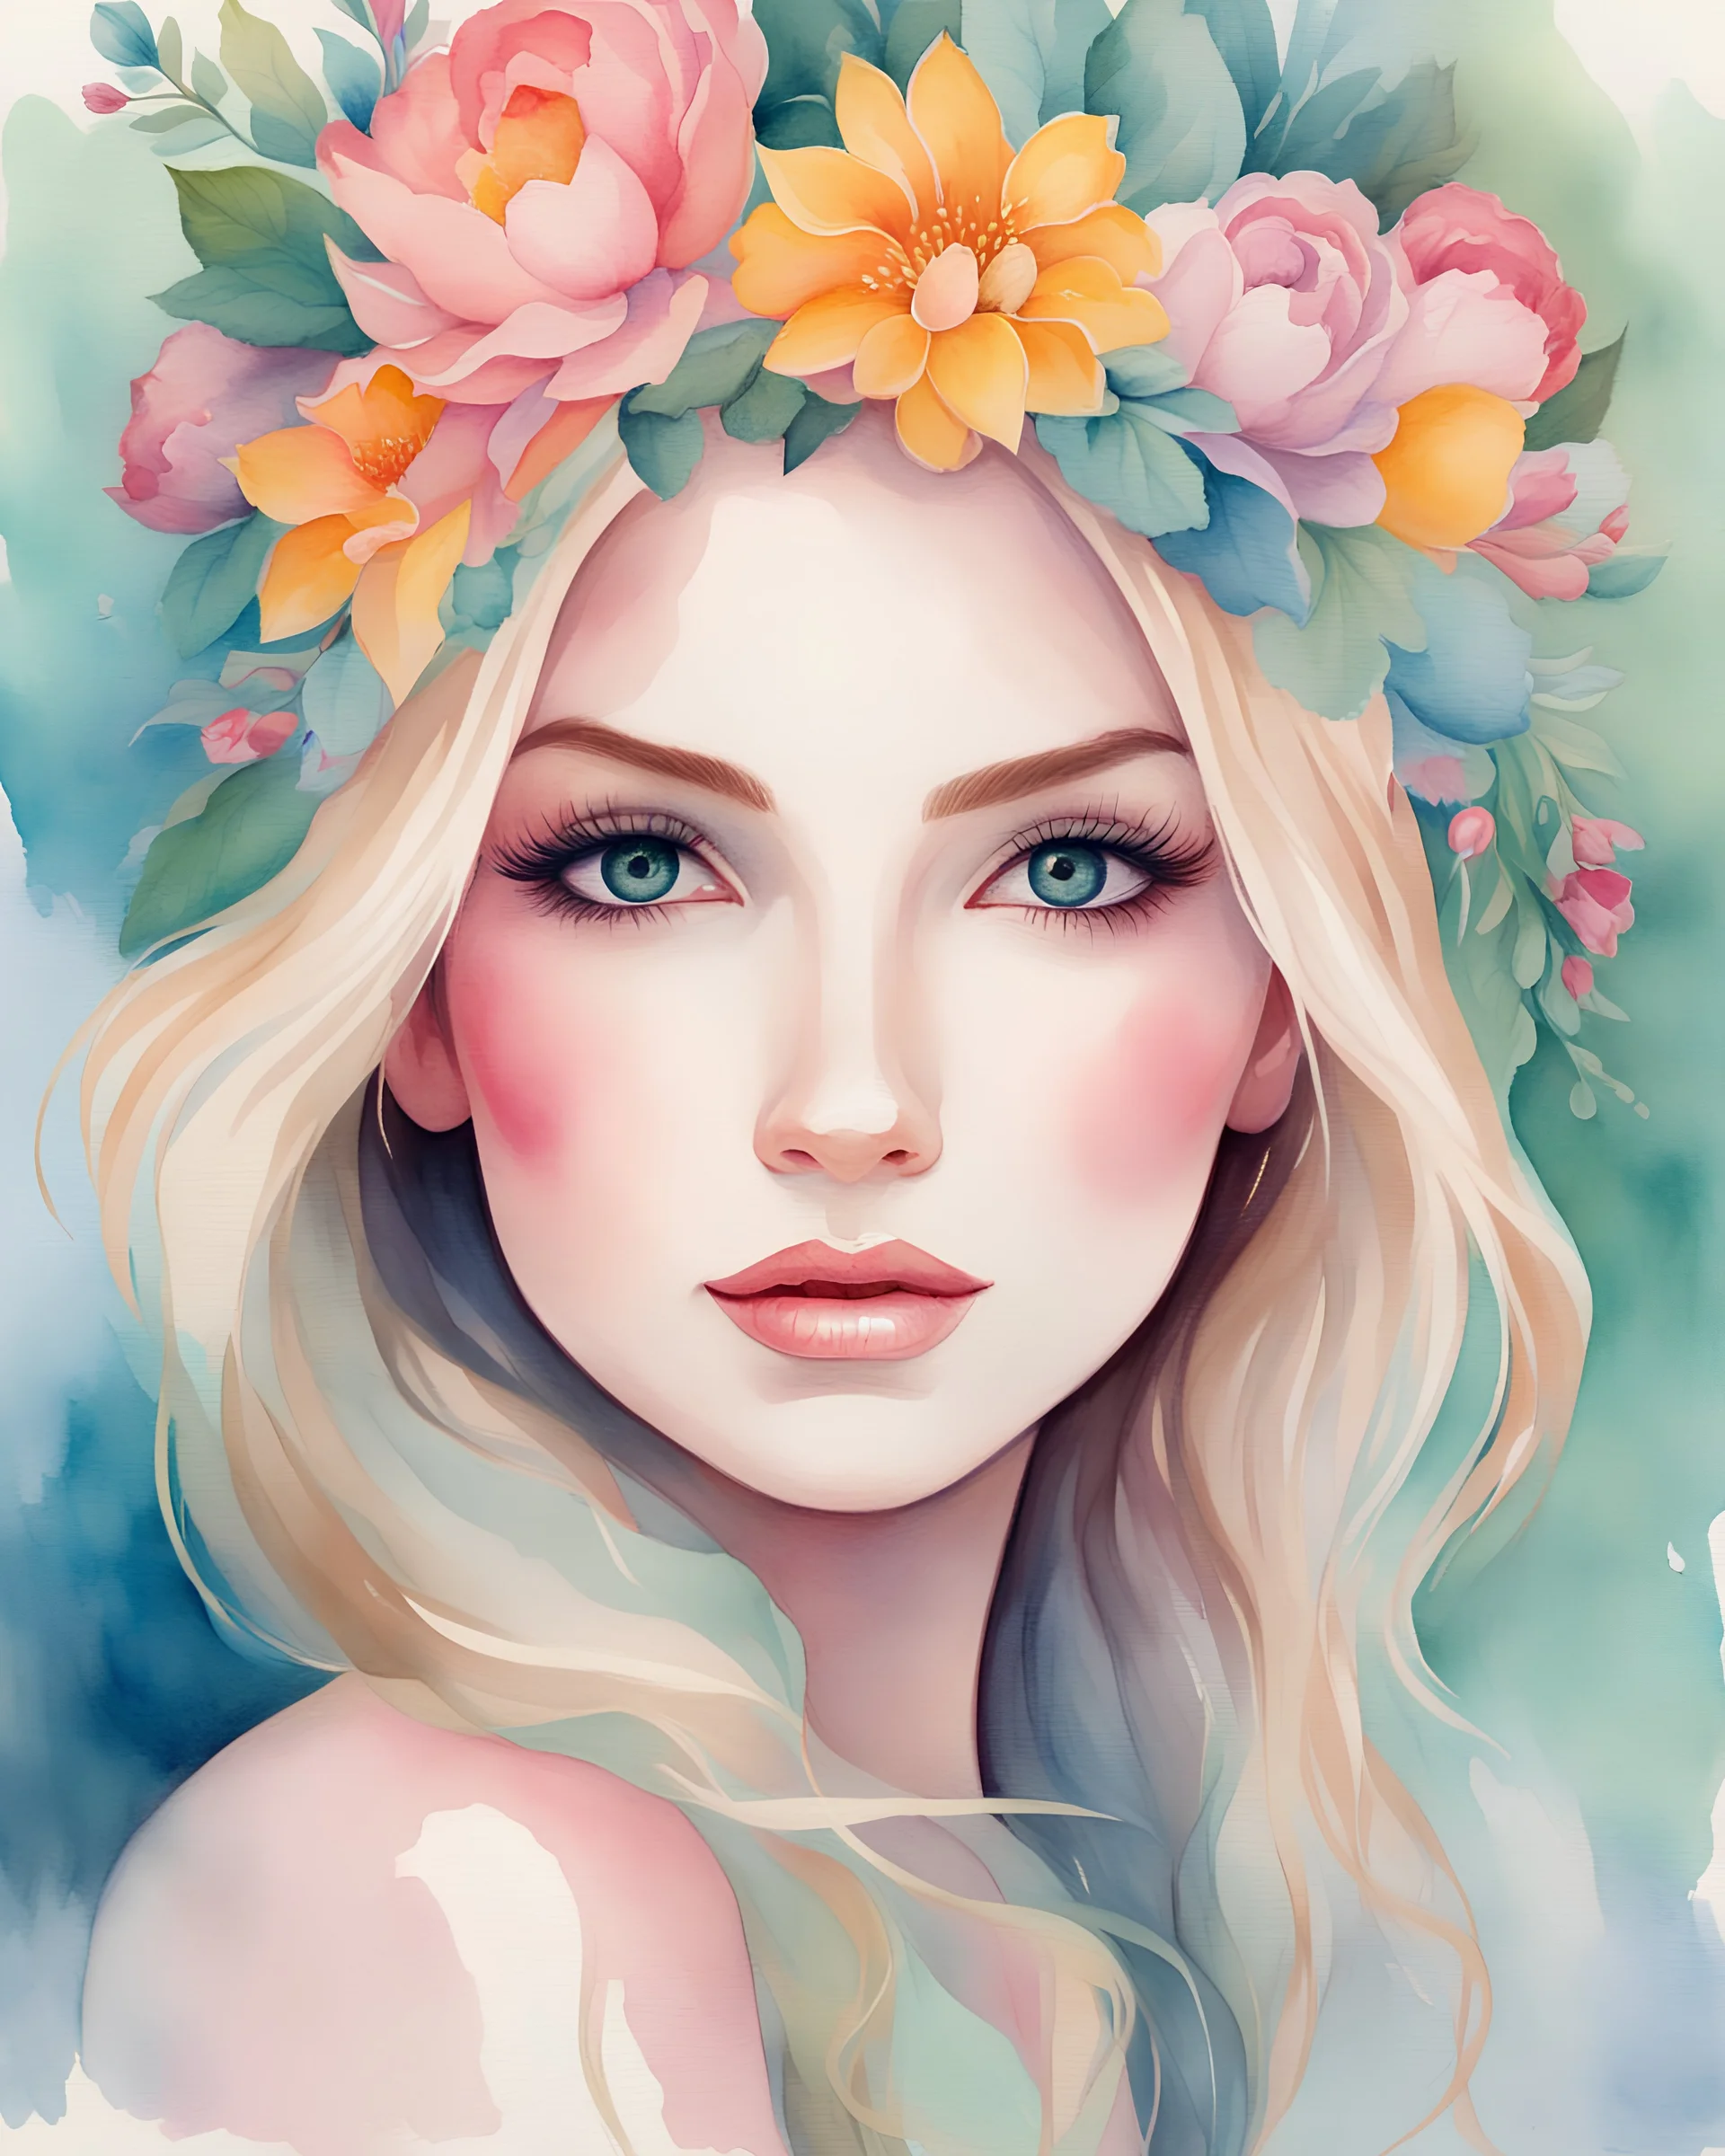 a watercolor painting of a girl with flowers in her hair, colorful watercolor painting, rossdraws pastel vibrant, vibrant watercolor painting, by Jeremiah Ketner, colorful watercolor, flowers on hair, flowers in hair, flower in hair, lotus floral crown girl, girl in flowers, vivid flower crown, watercolor detailed art, girl with a flower head, intense watercolor, colorful illustration, watercolor illustration